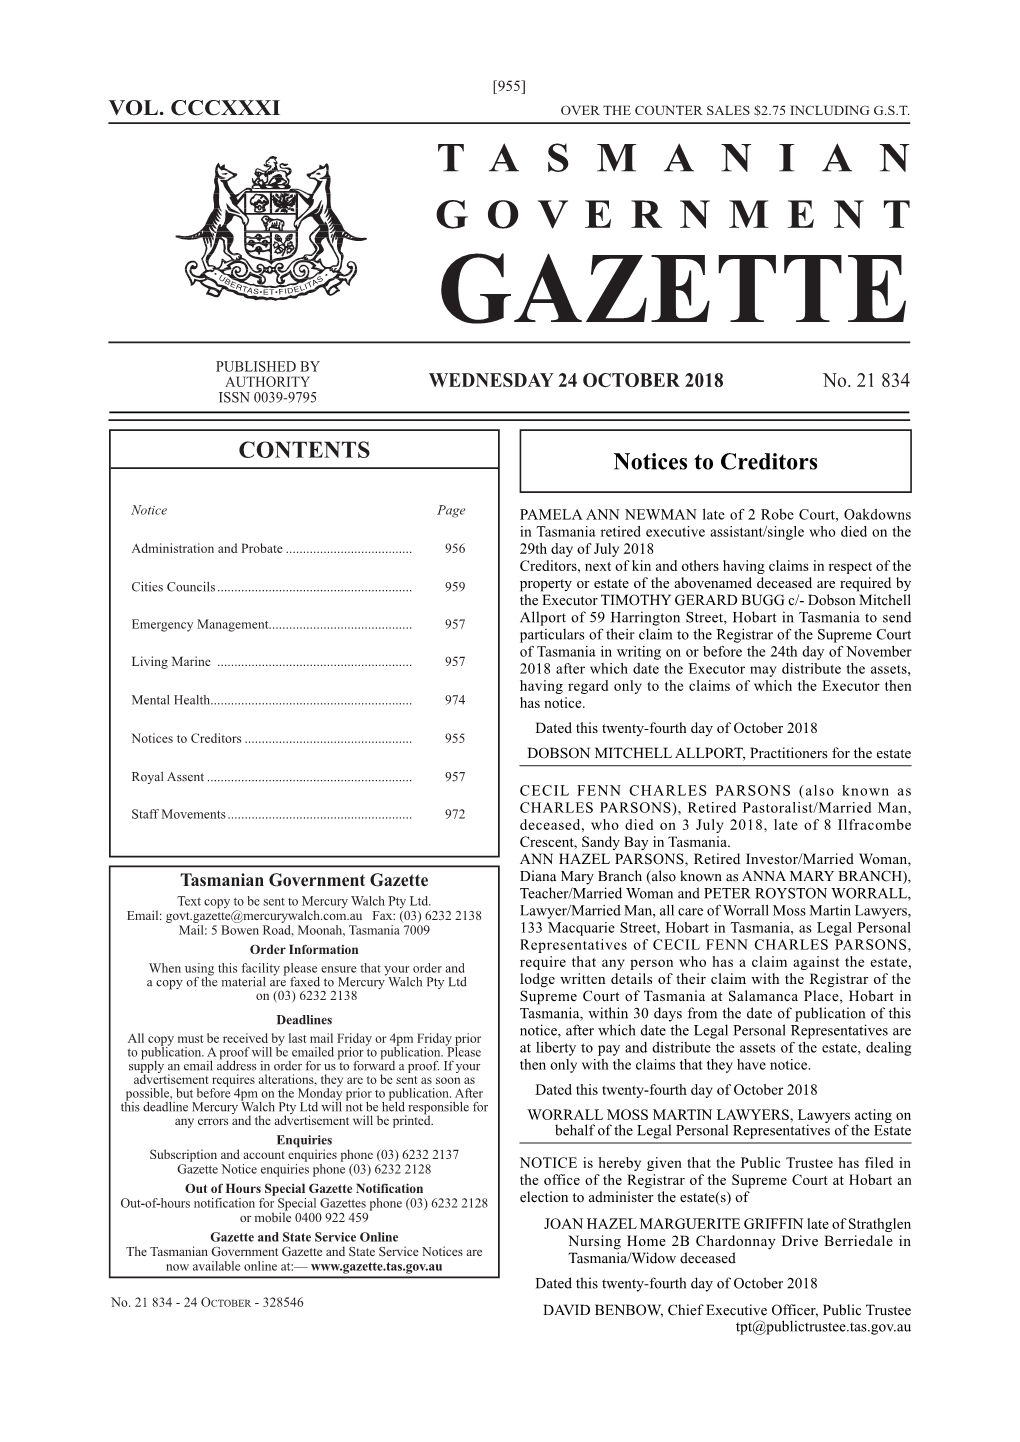 GAZETTE PUBLISHED by AUTHORITY WEDNESDAY 24 OCTOBER 2018 No